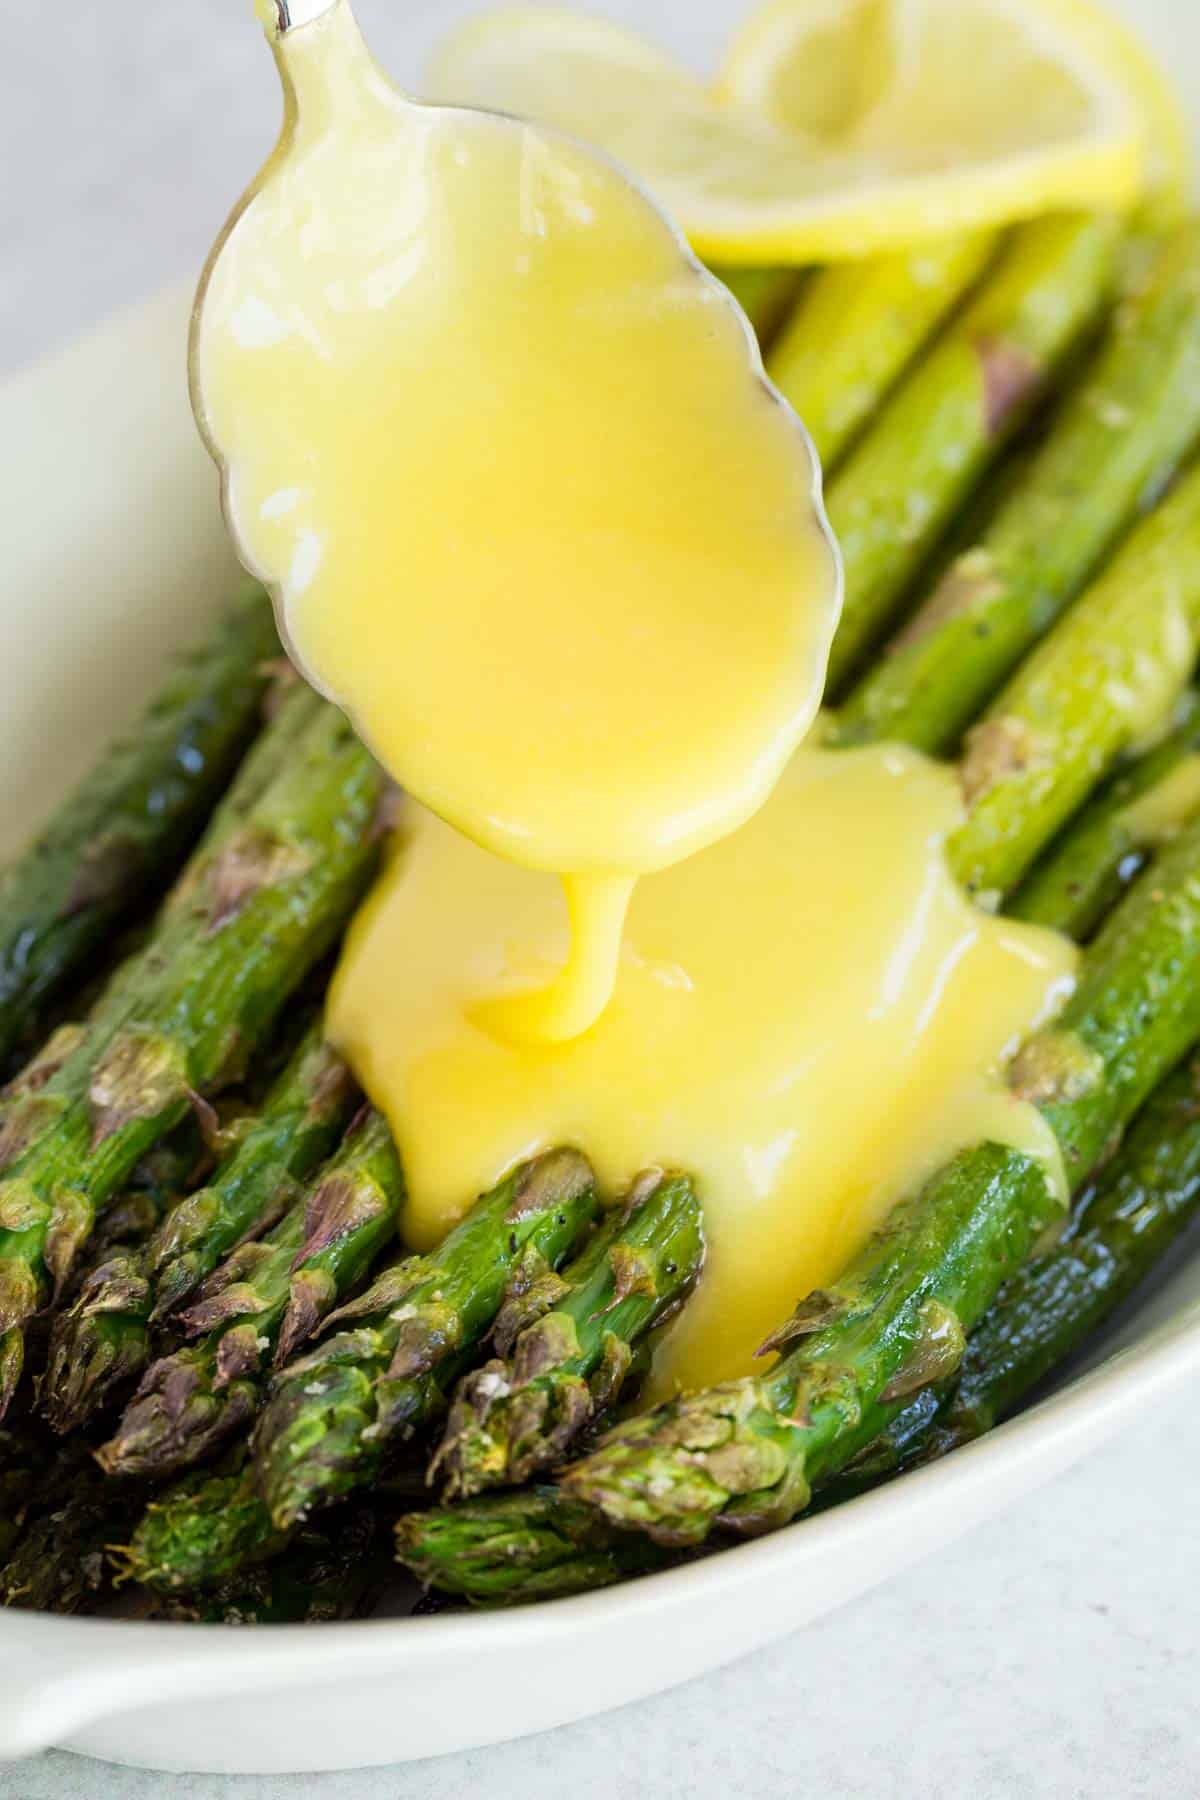 Hollandaise sauce is spooned over top a dish filled with roasted asparagus.